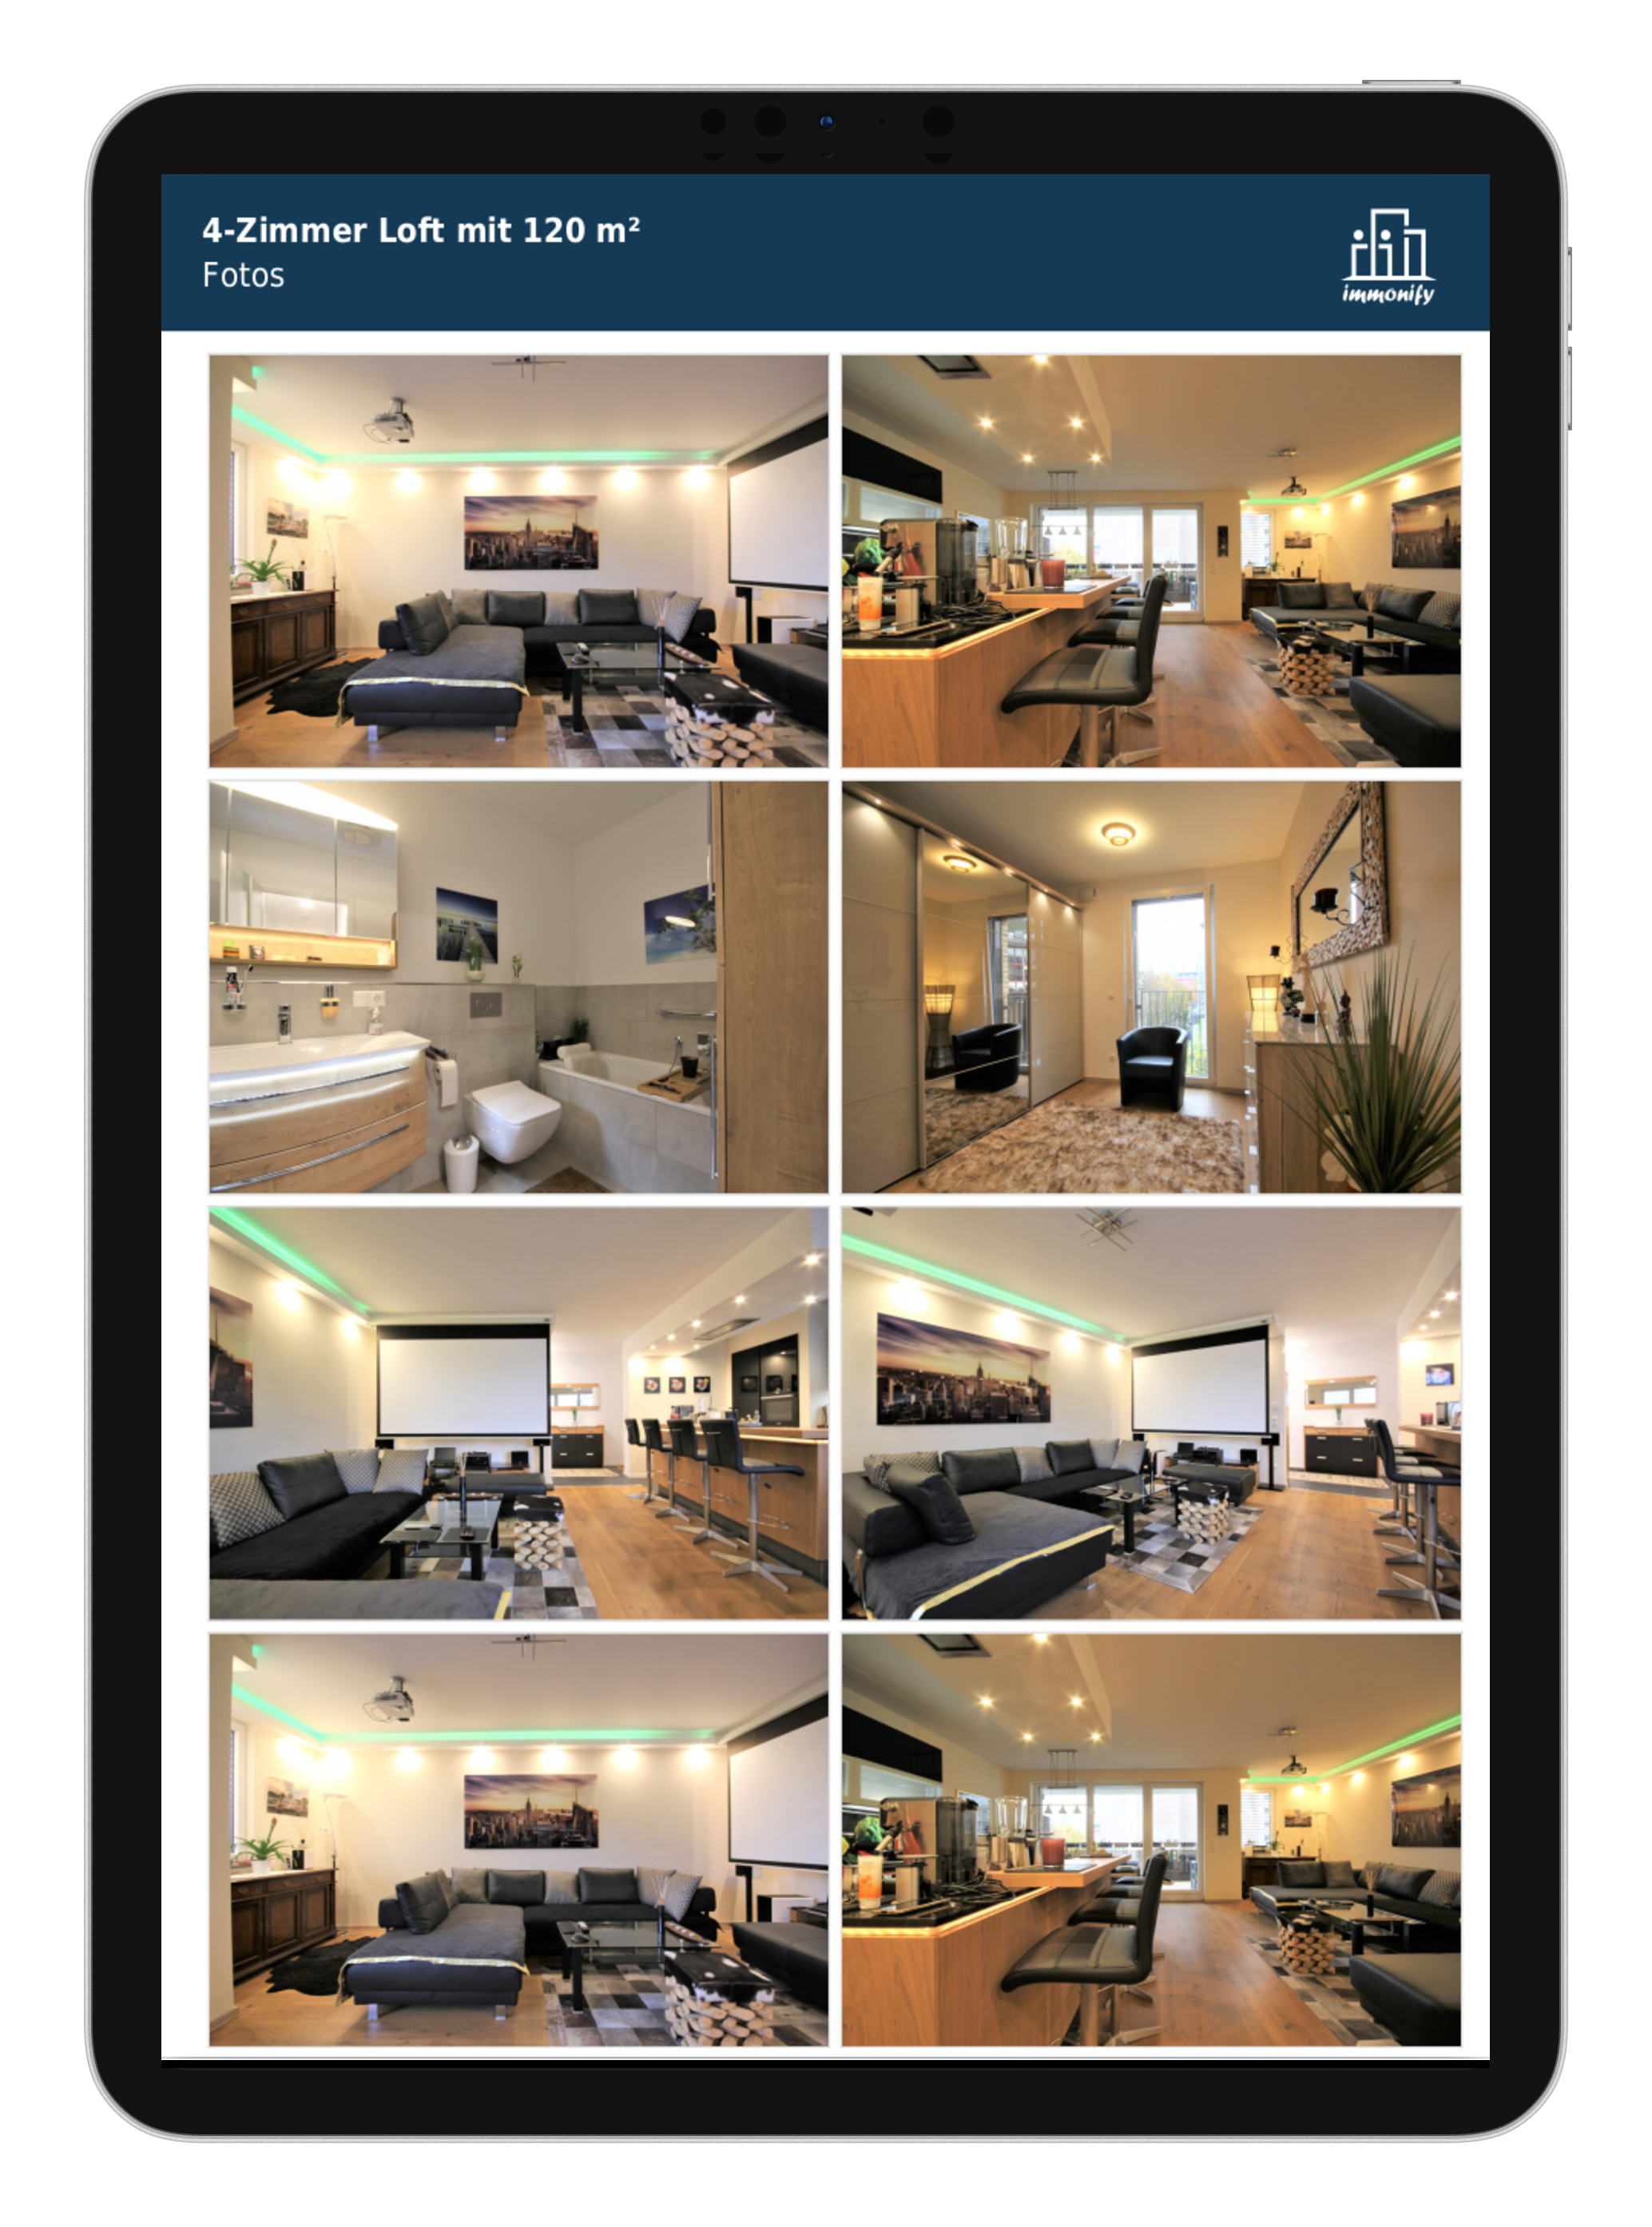 Page 2: Picture gallery with up to 8 photos per page as well as floor plans and visualisations